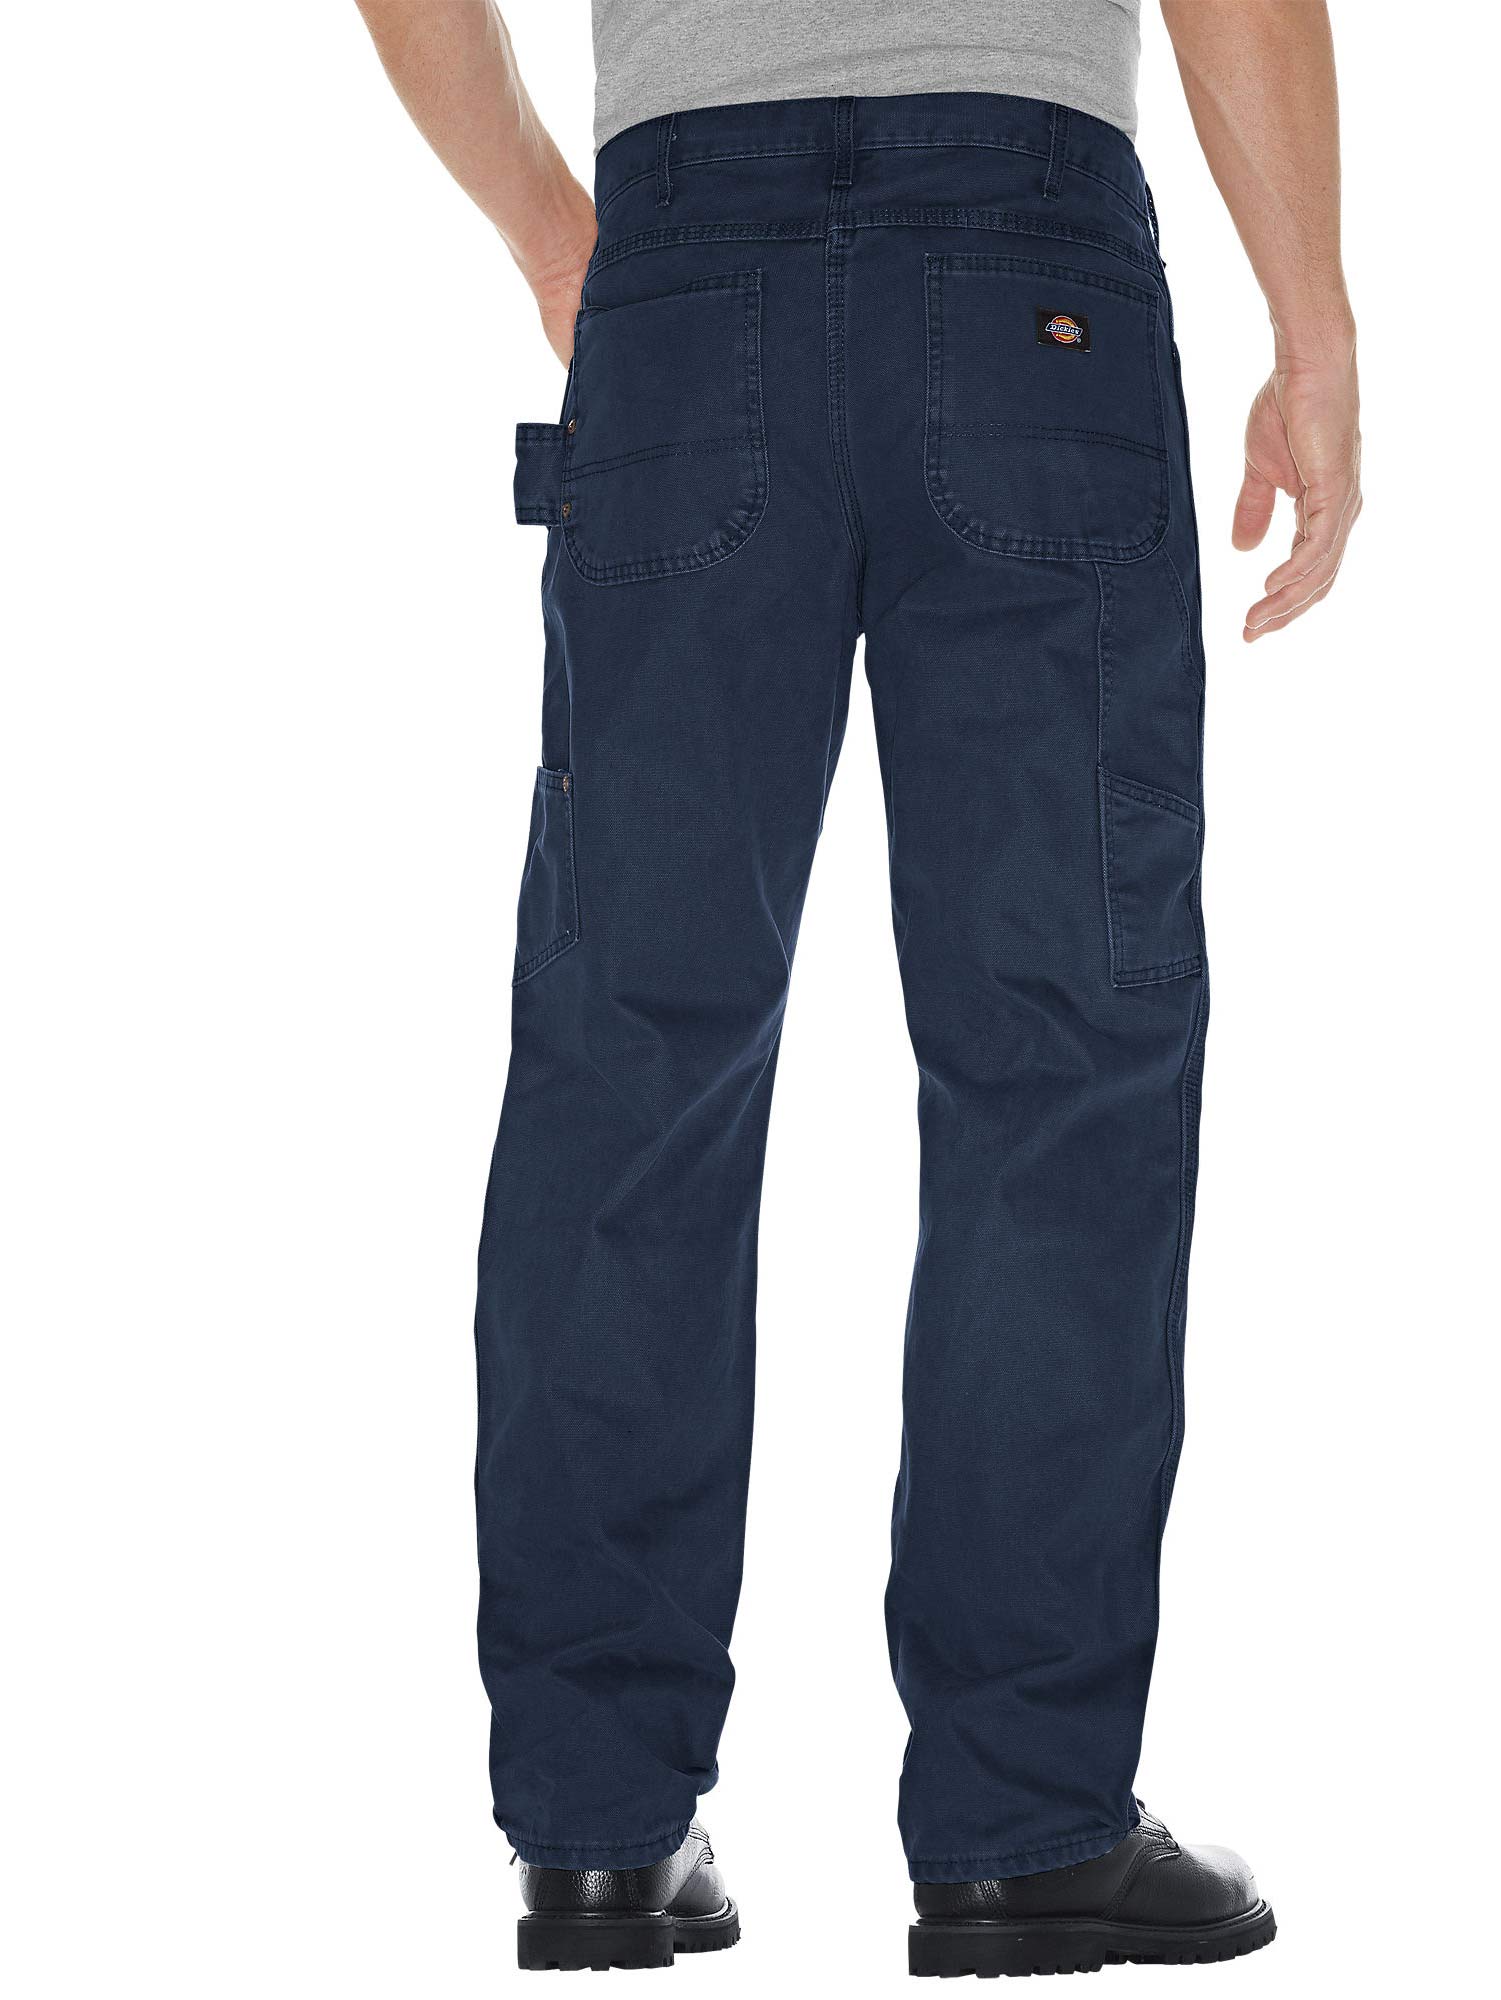 Dickies Relaxed Fit Sanded Duck Carpenter Pant - DU336